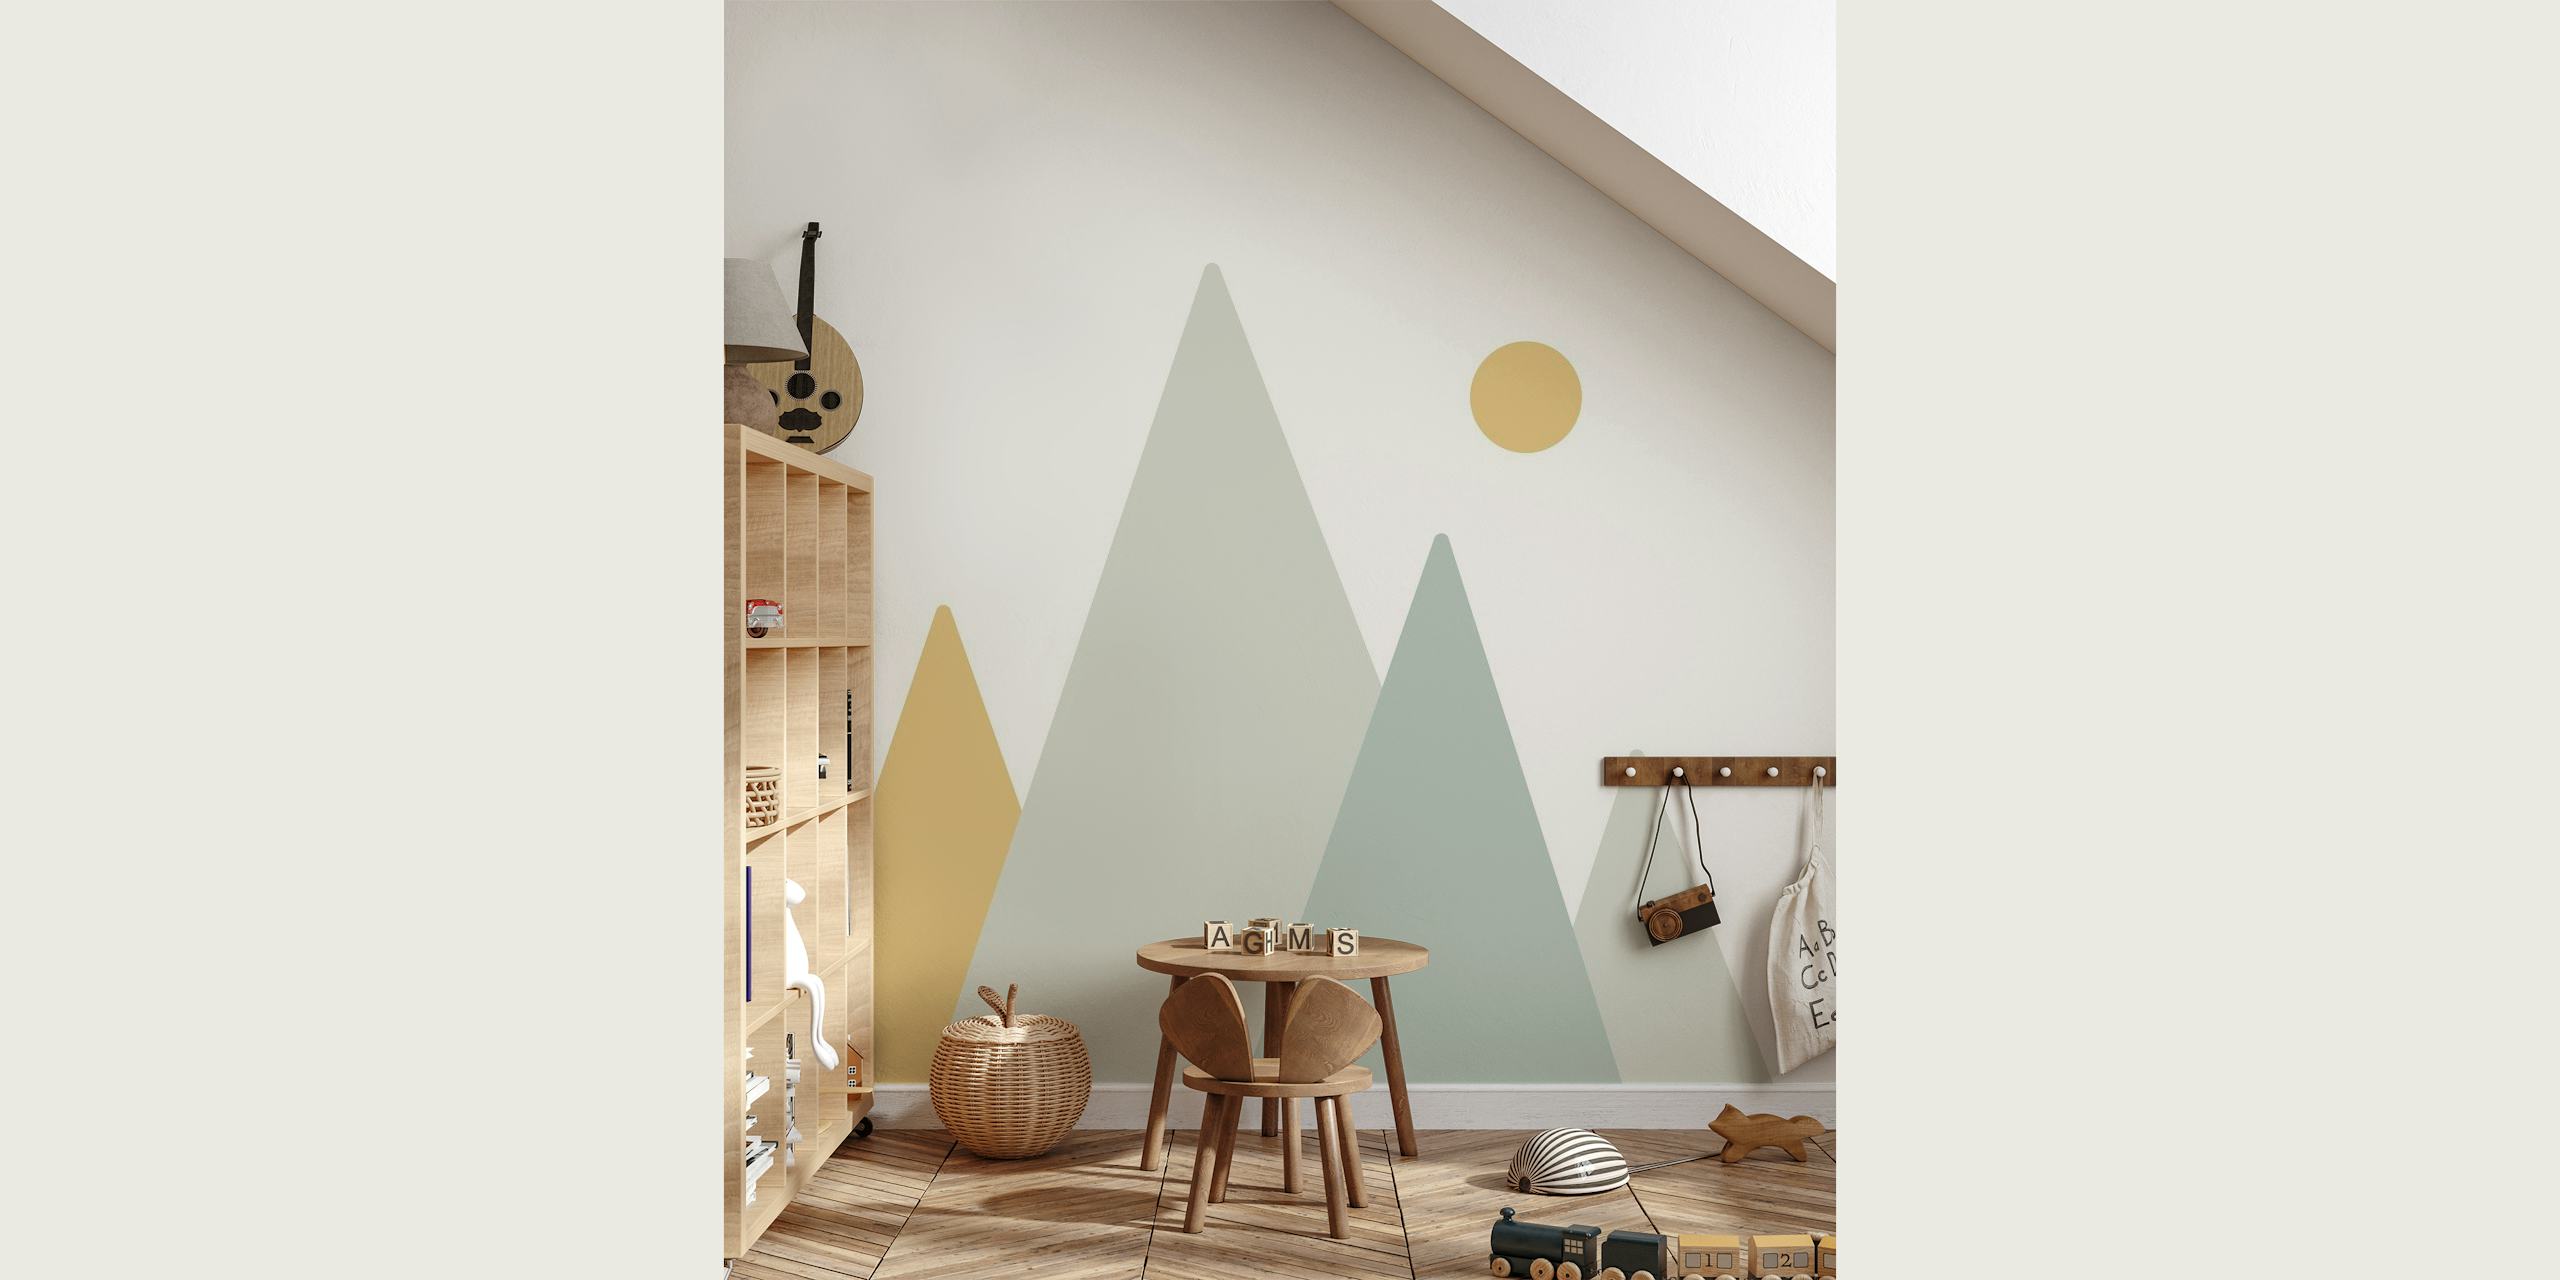 Simplified mountain range wall mural with sun illustration in boho style